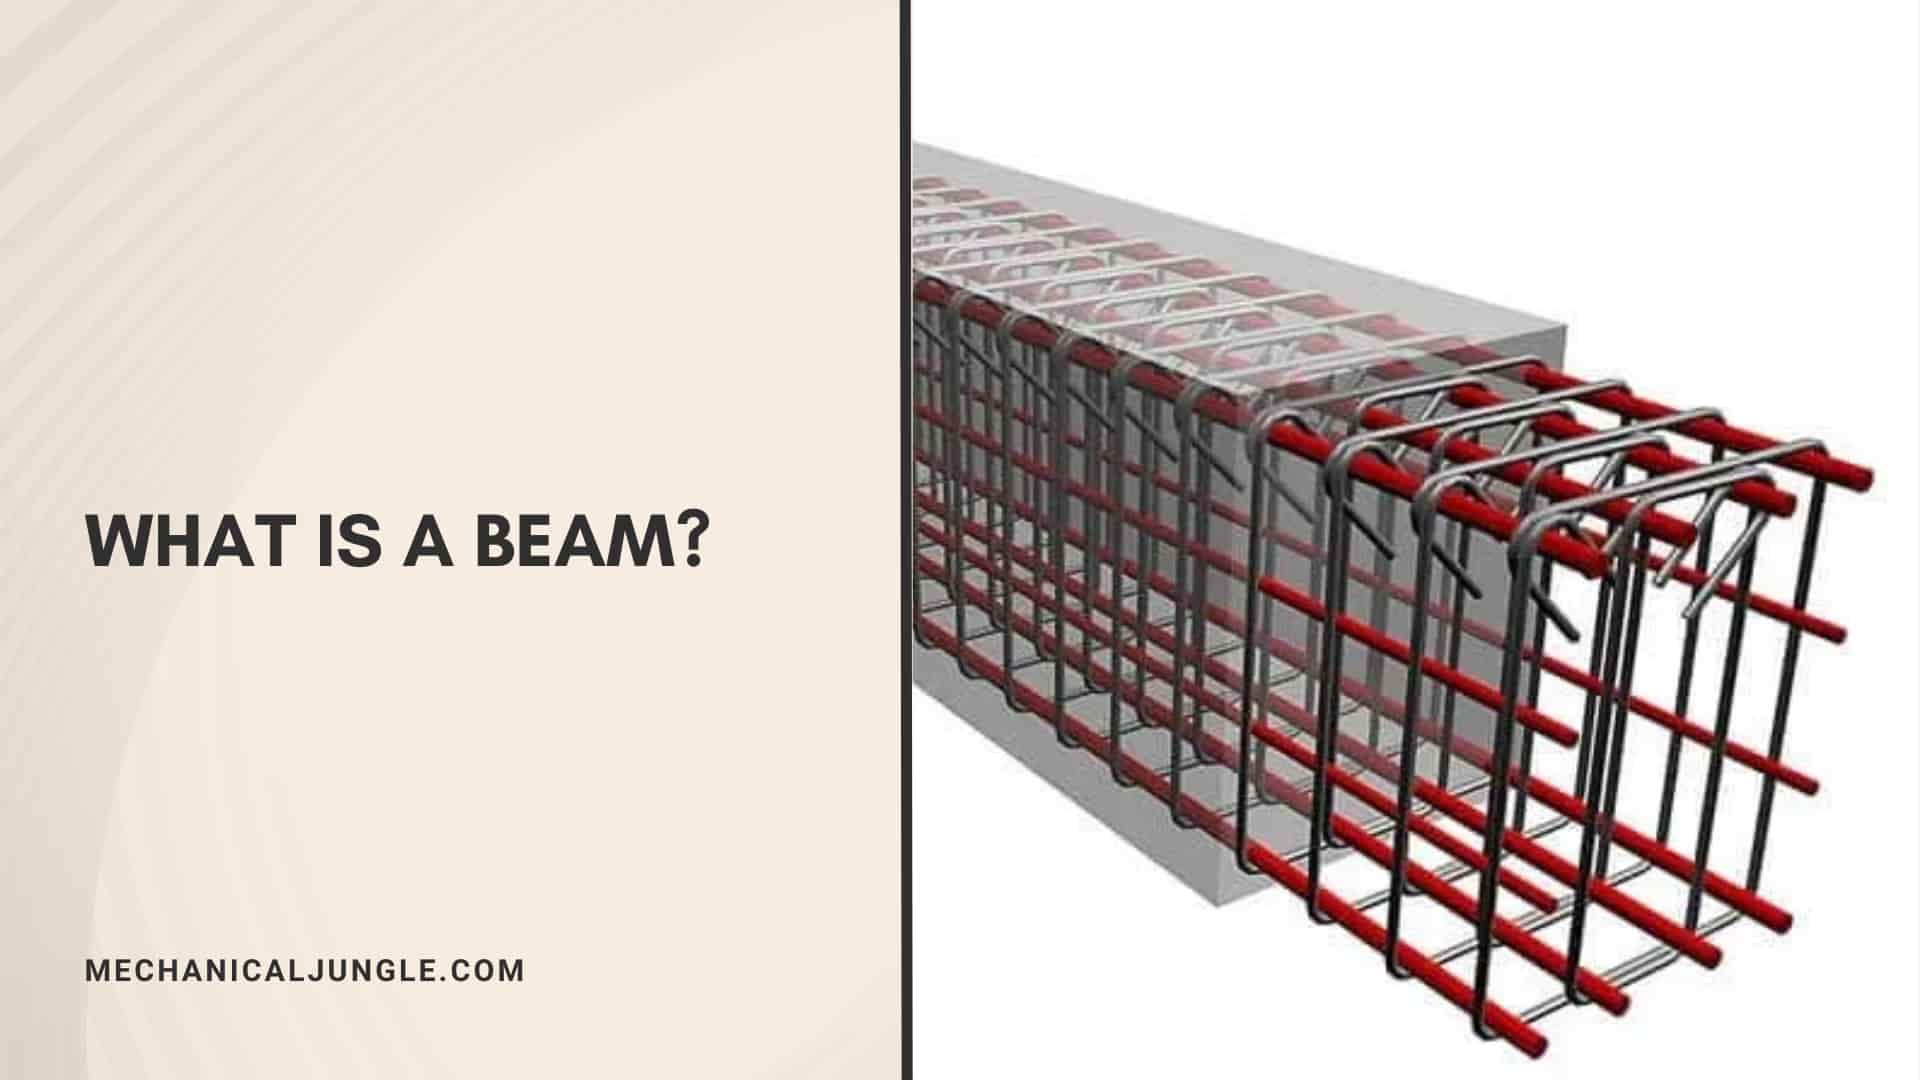 What Is a Beam?